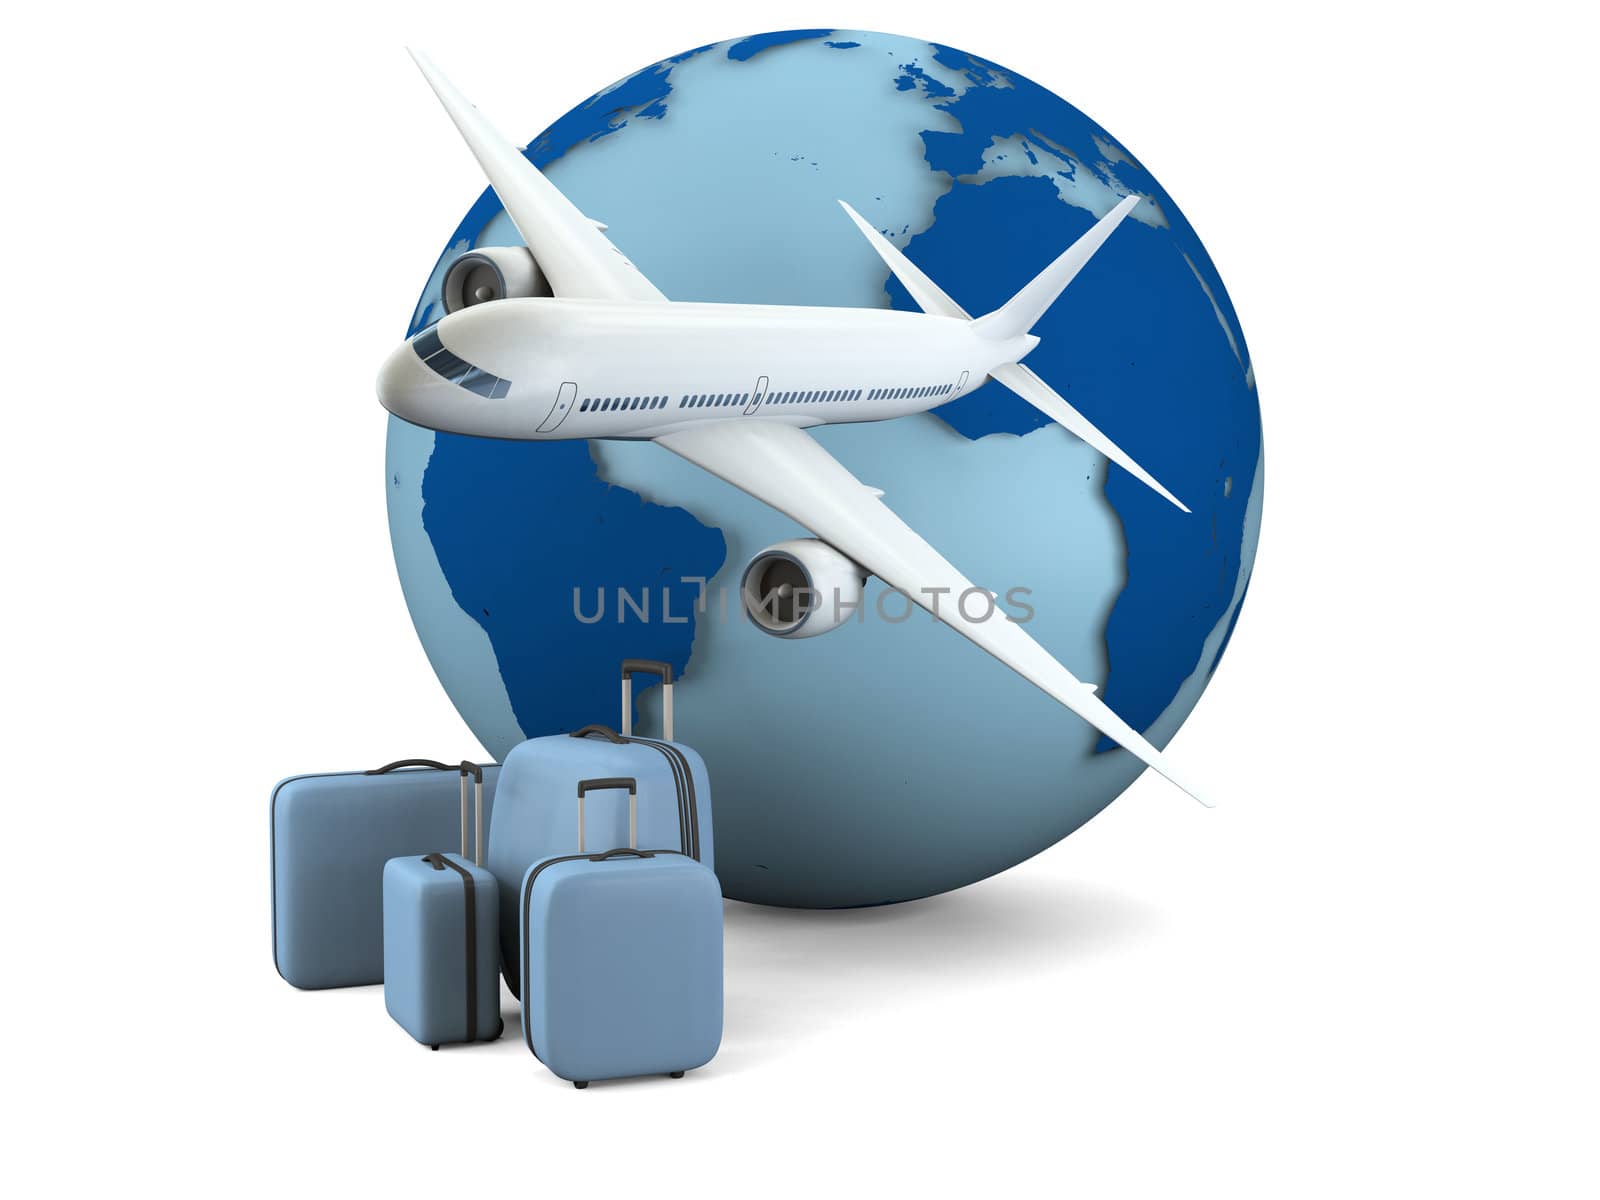 Concept of air travel with model of Earth, airplane and luggage isolated on white background. Map of Earth provided by visibleearth.nasa.gov